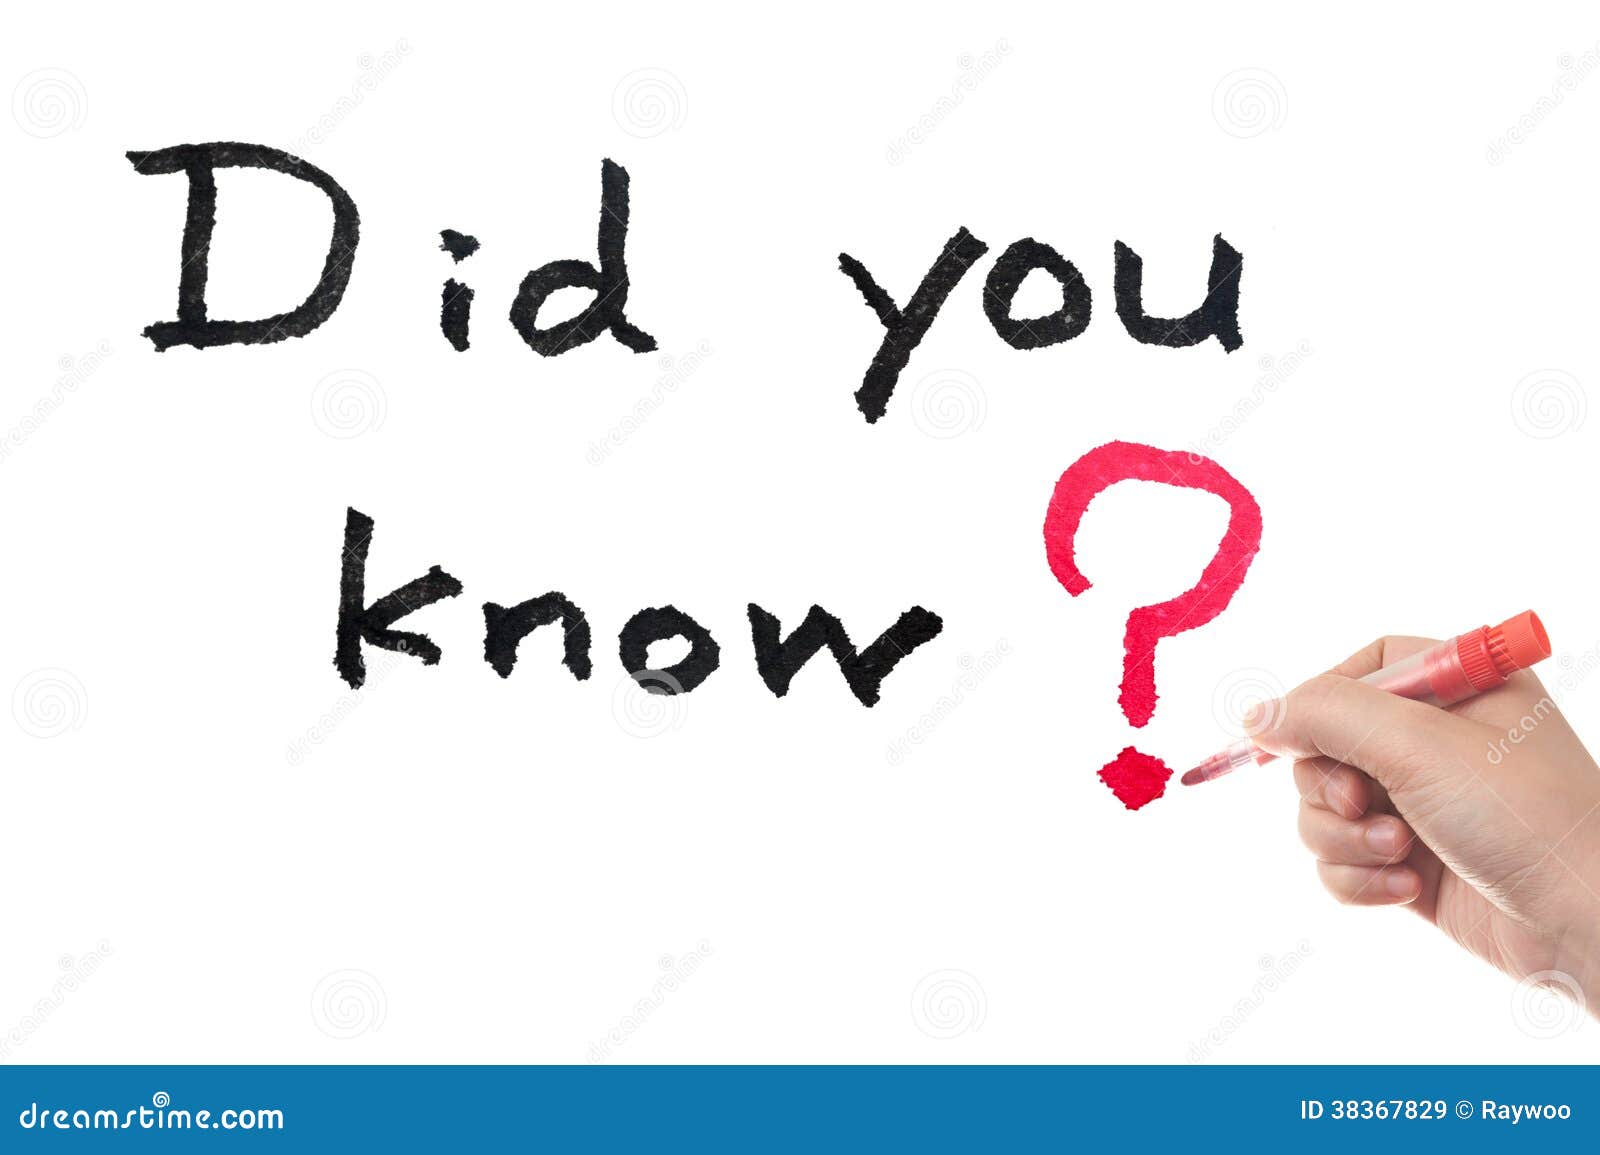 did you know clipart - photo #14